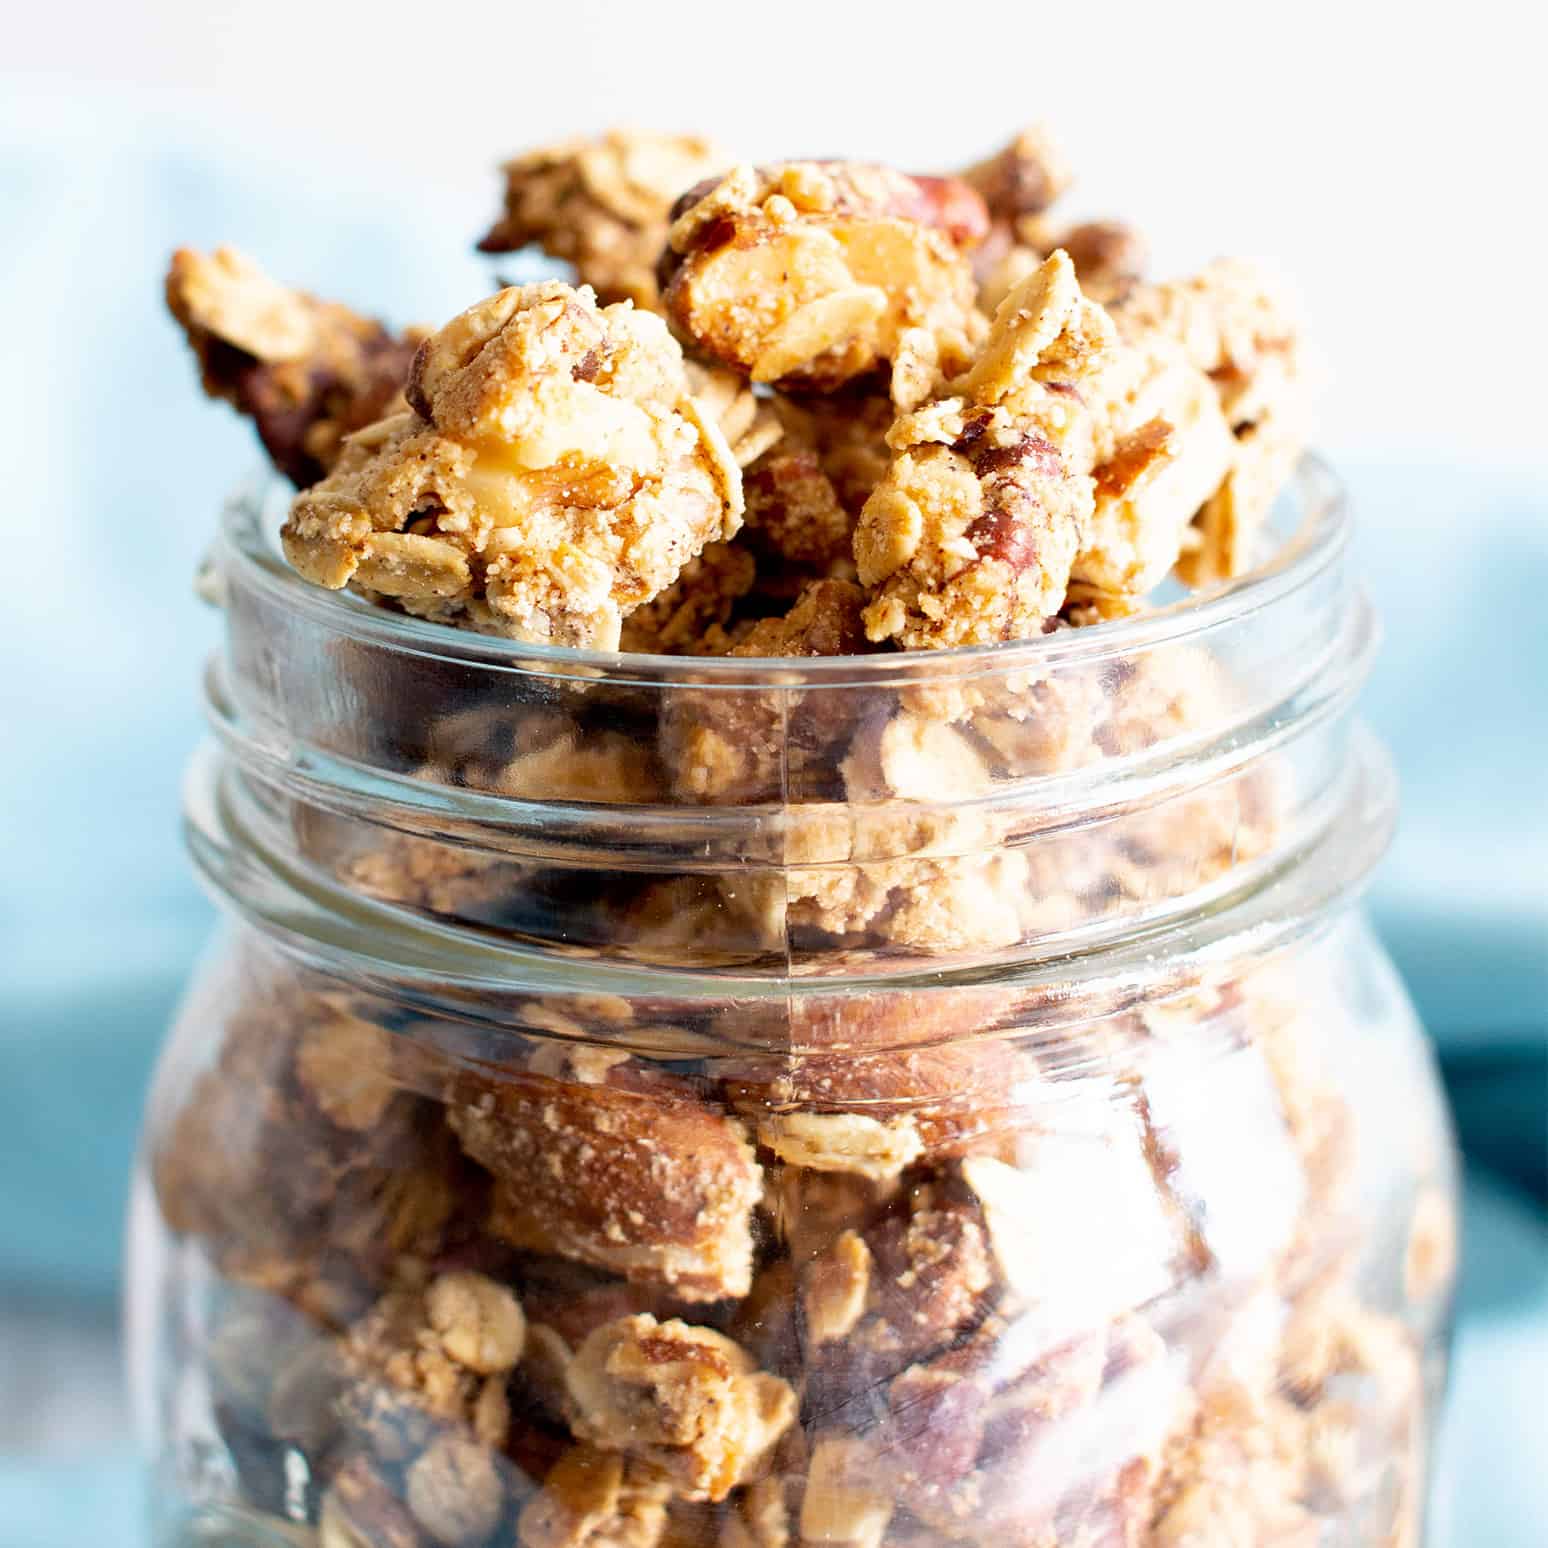 4 Ingredient Healthy Homemade Gluten Free Vegan Granola Recipe (V, GF): a crispy homemade granola recipe made in just a few minutes of prep time, packed full of your favorite nuts and oats. #Vegan #Granola #GlutenFree #Healthy #Snacks | Recipe at BeamingBaker.com